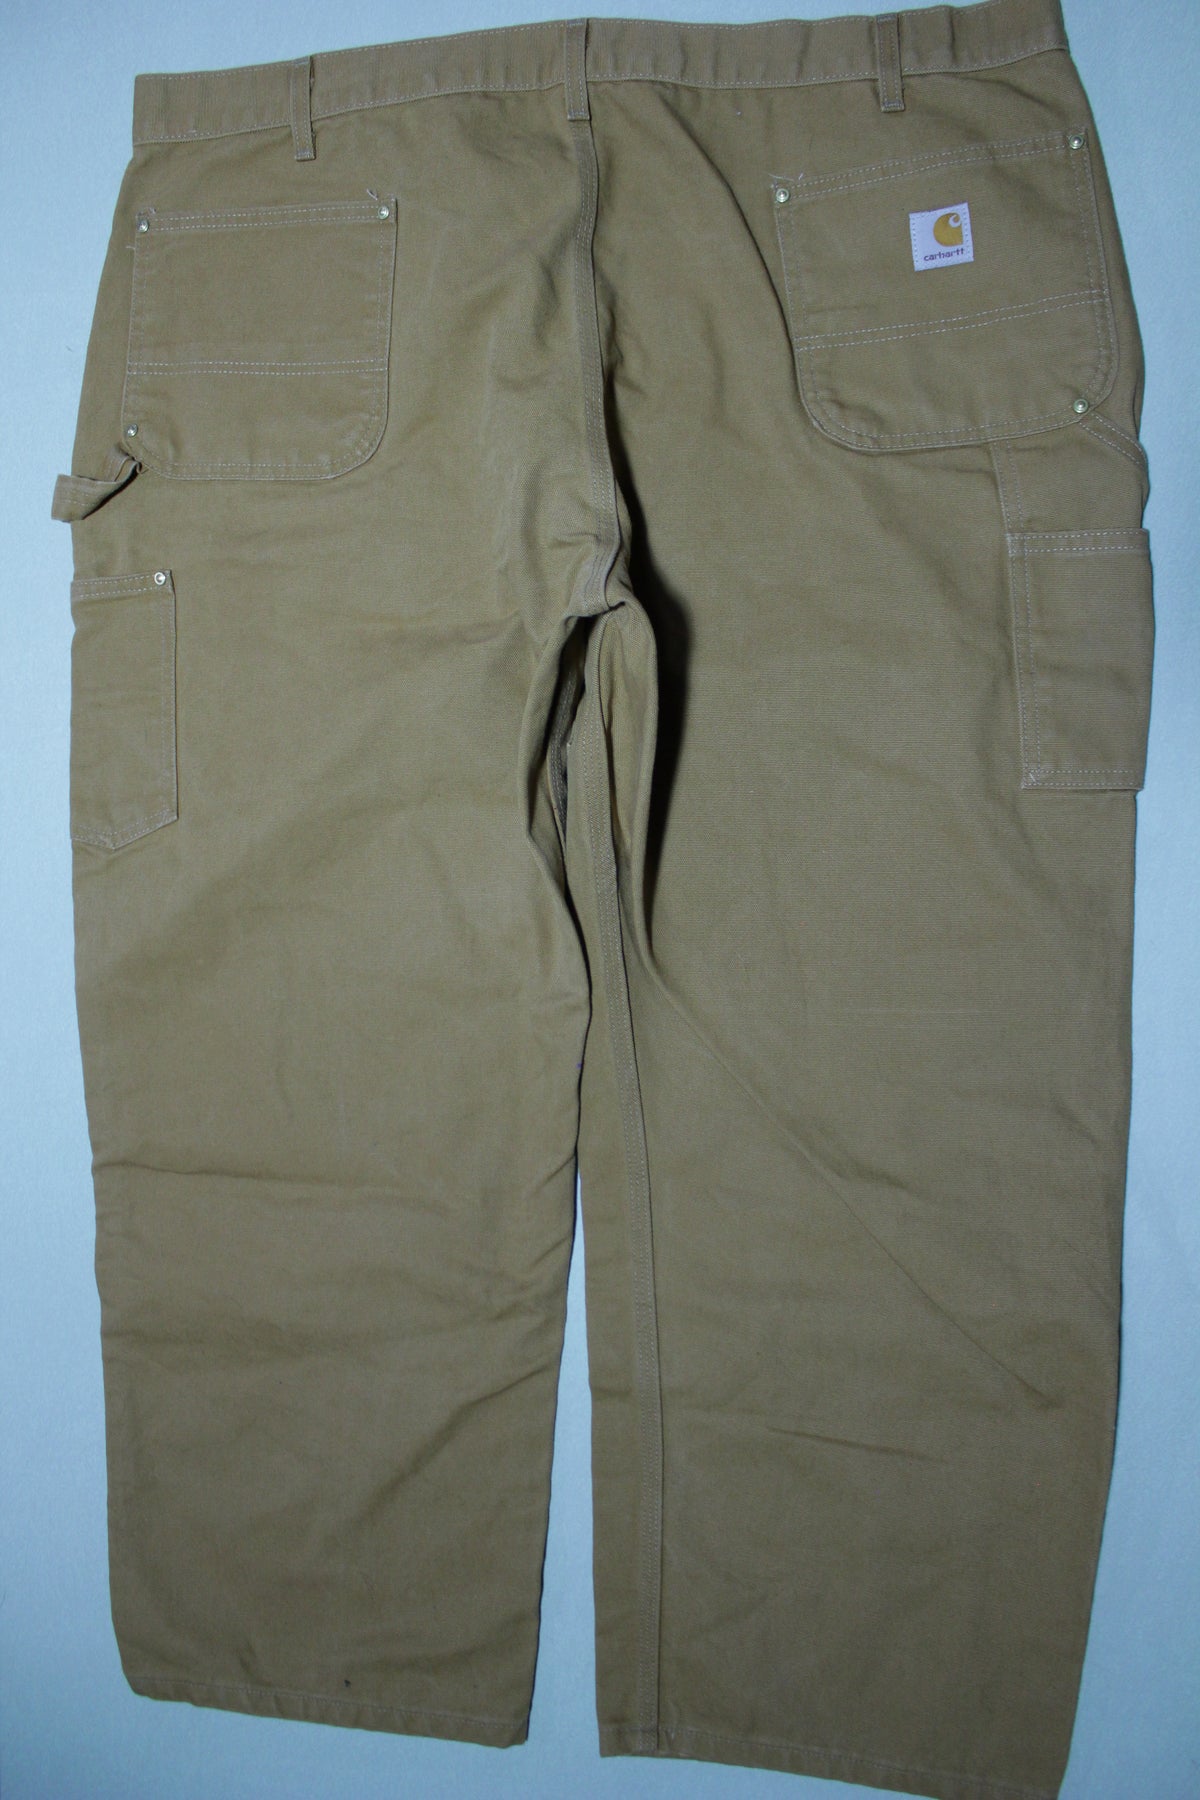 Carhartt B01 BRN Washed Duck Work Double Knee Front Pants